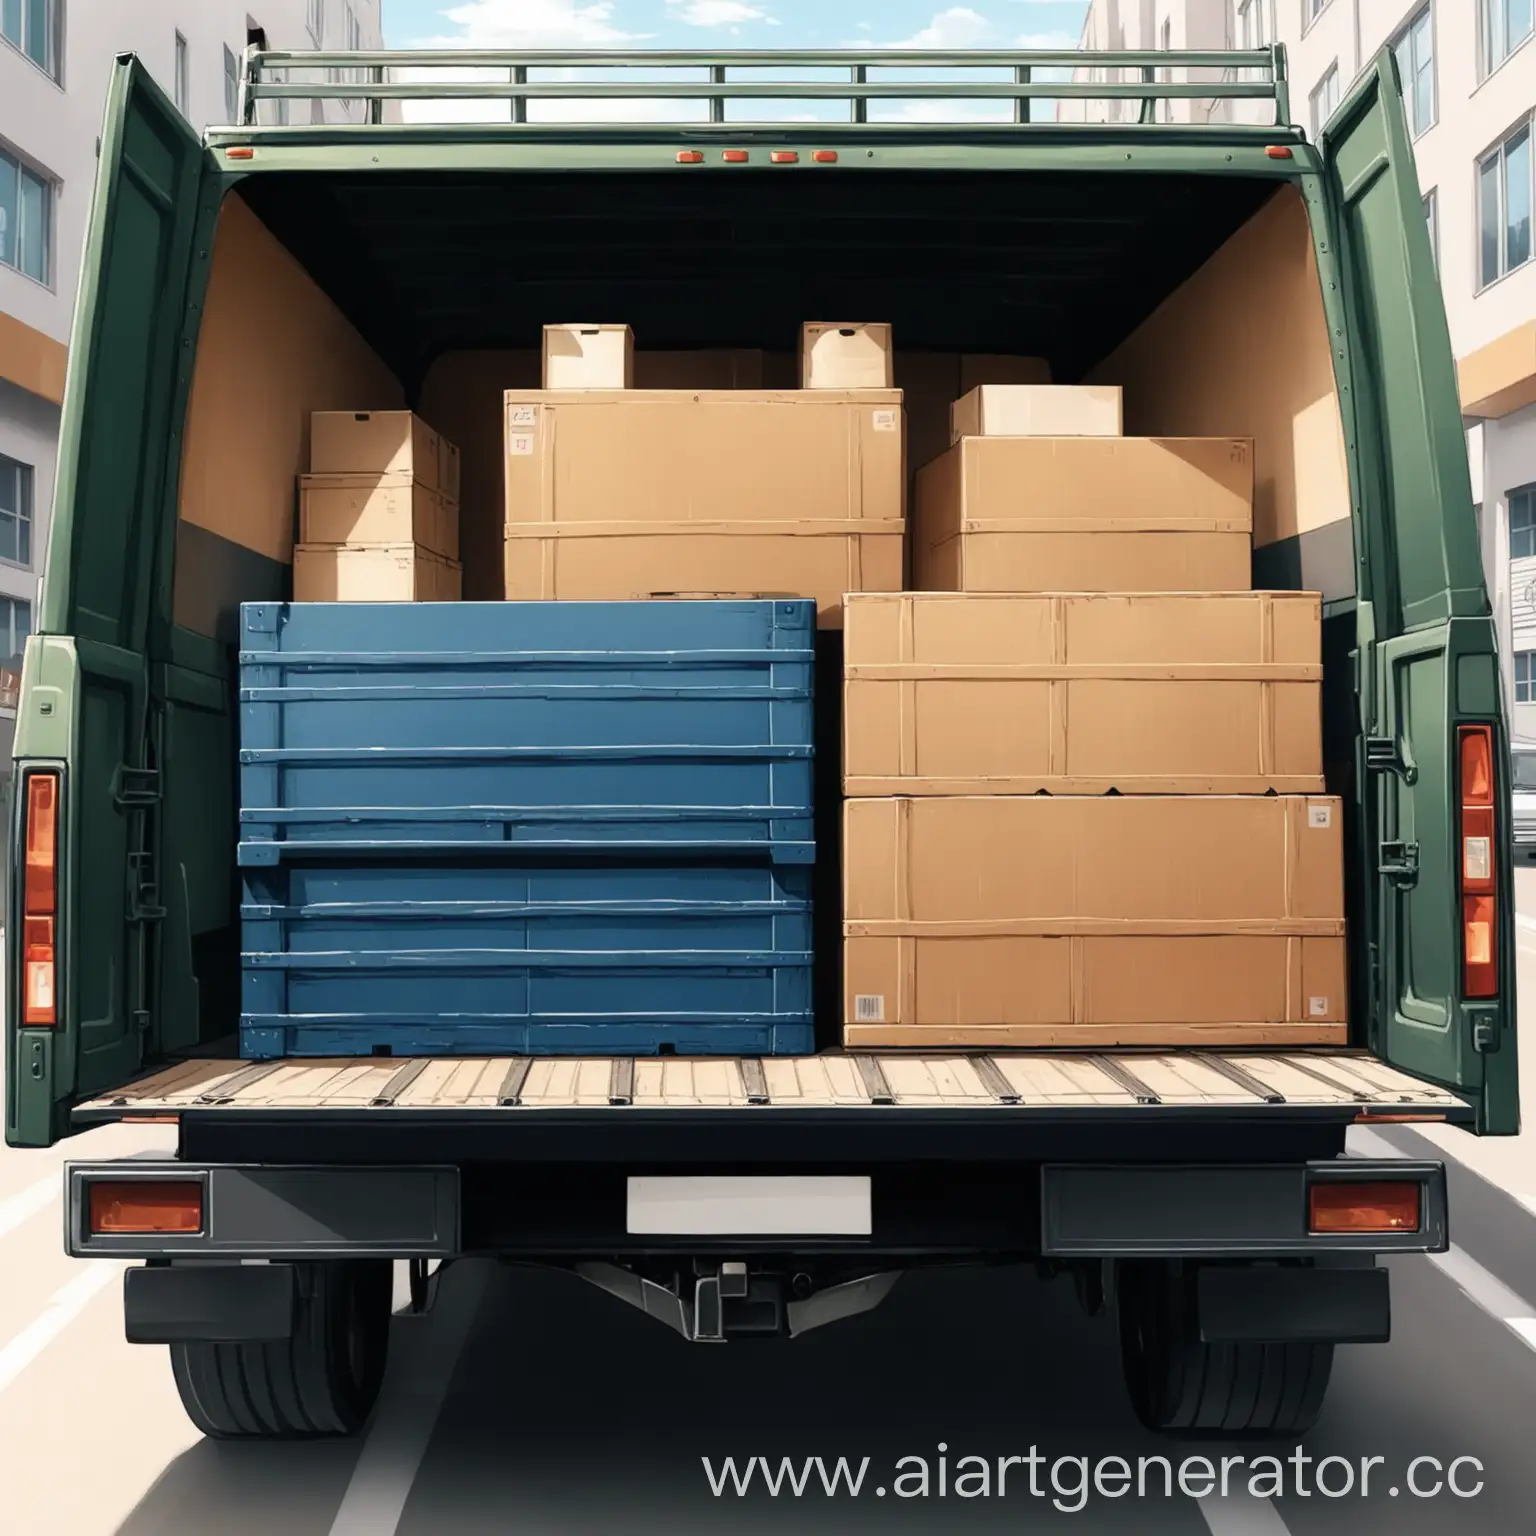 Cargo-in-Truck-Transportation-Loaded-Vehicle-Moving-on-Highway